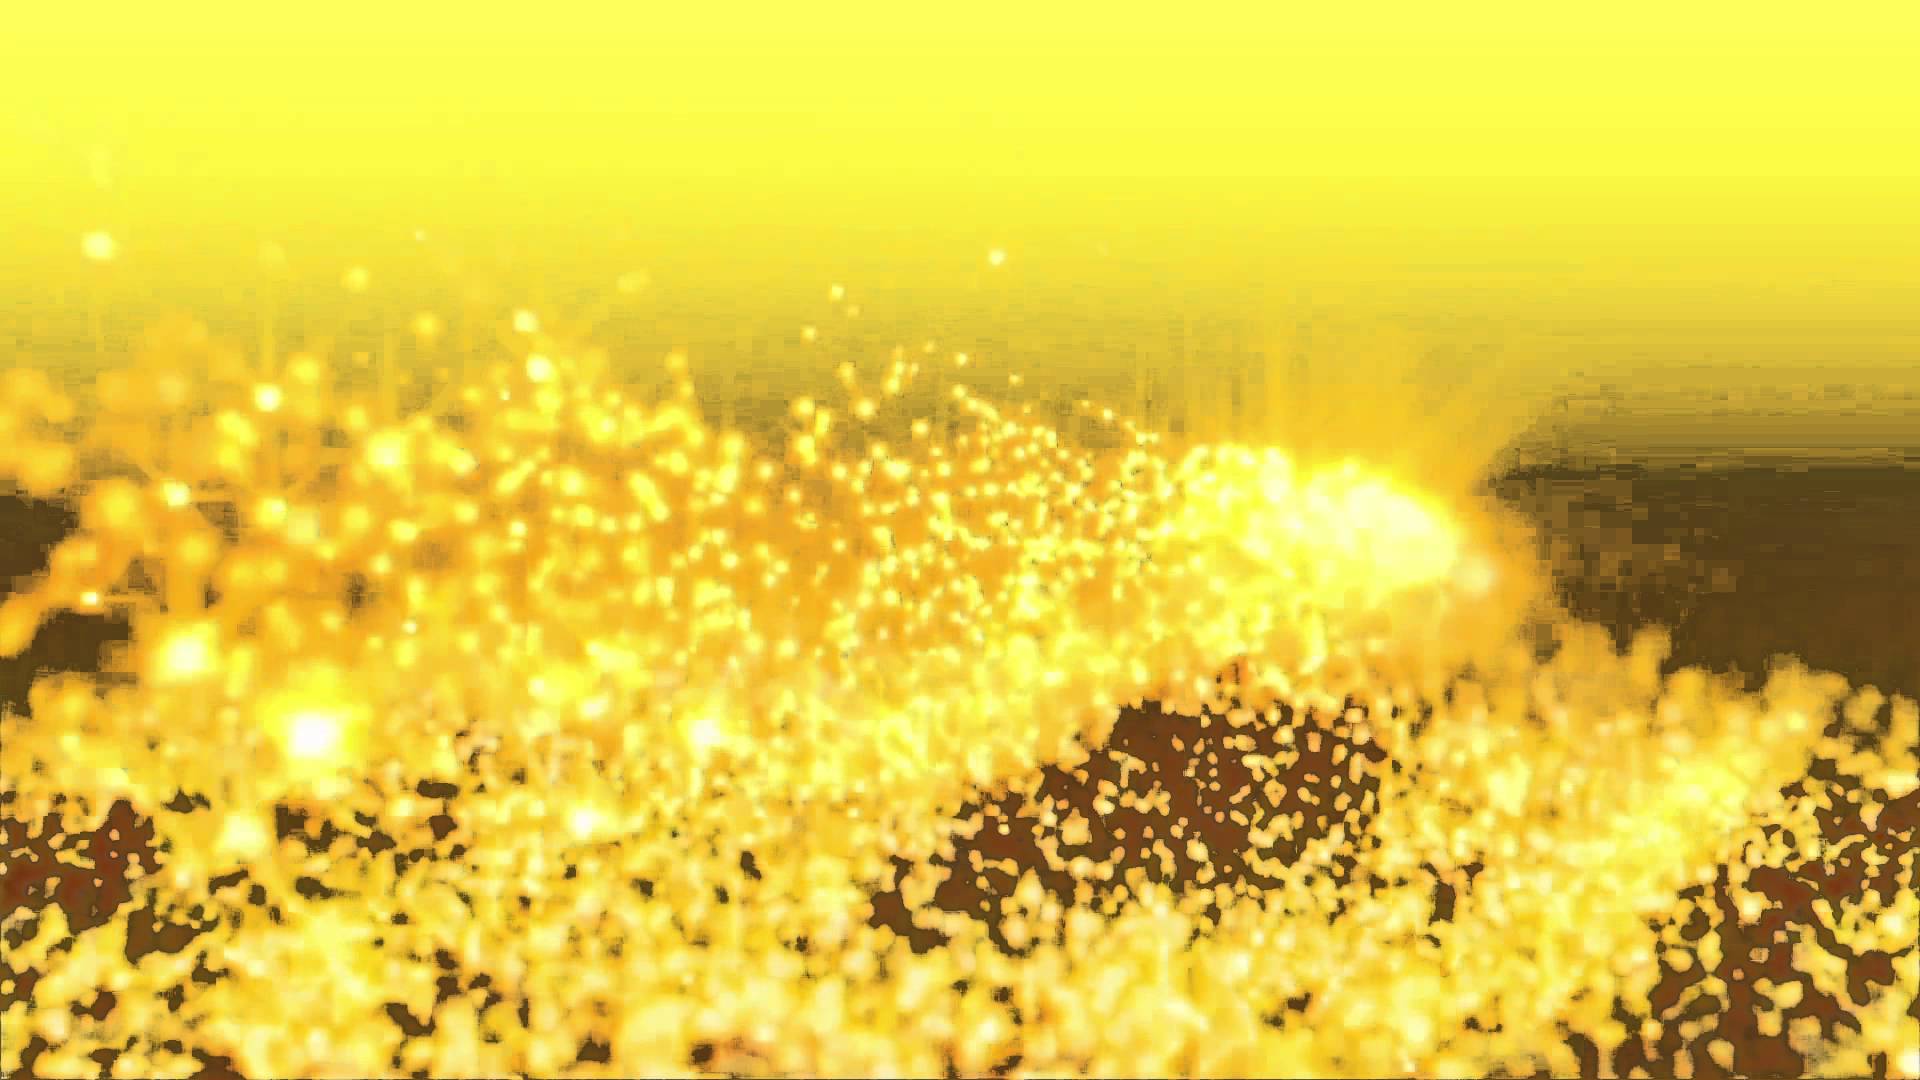 Animated Background Wallpaper Gold Dust Wind Particles HD PixelBoom CG